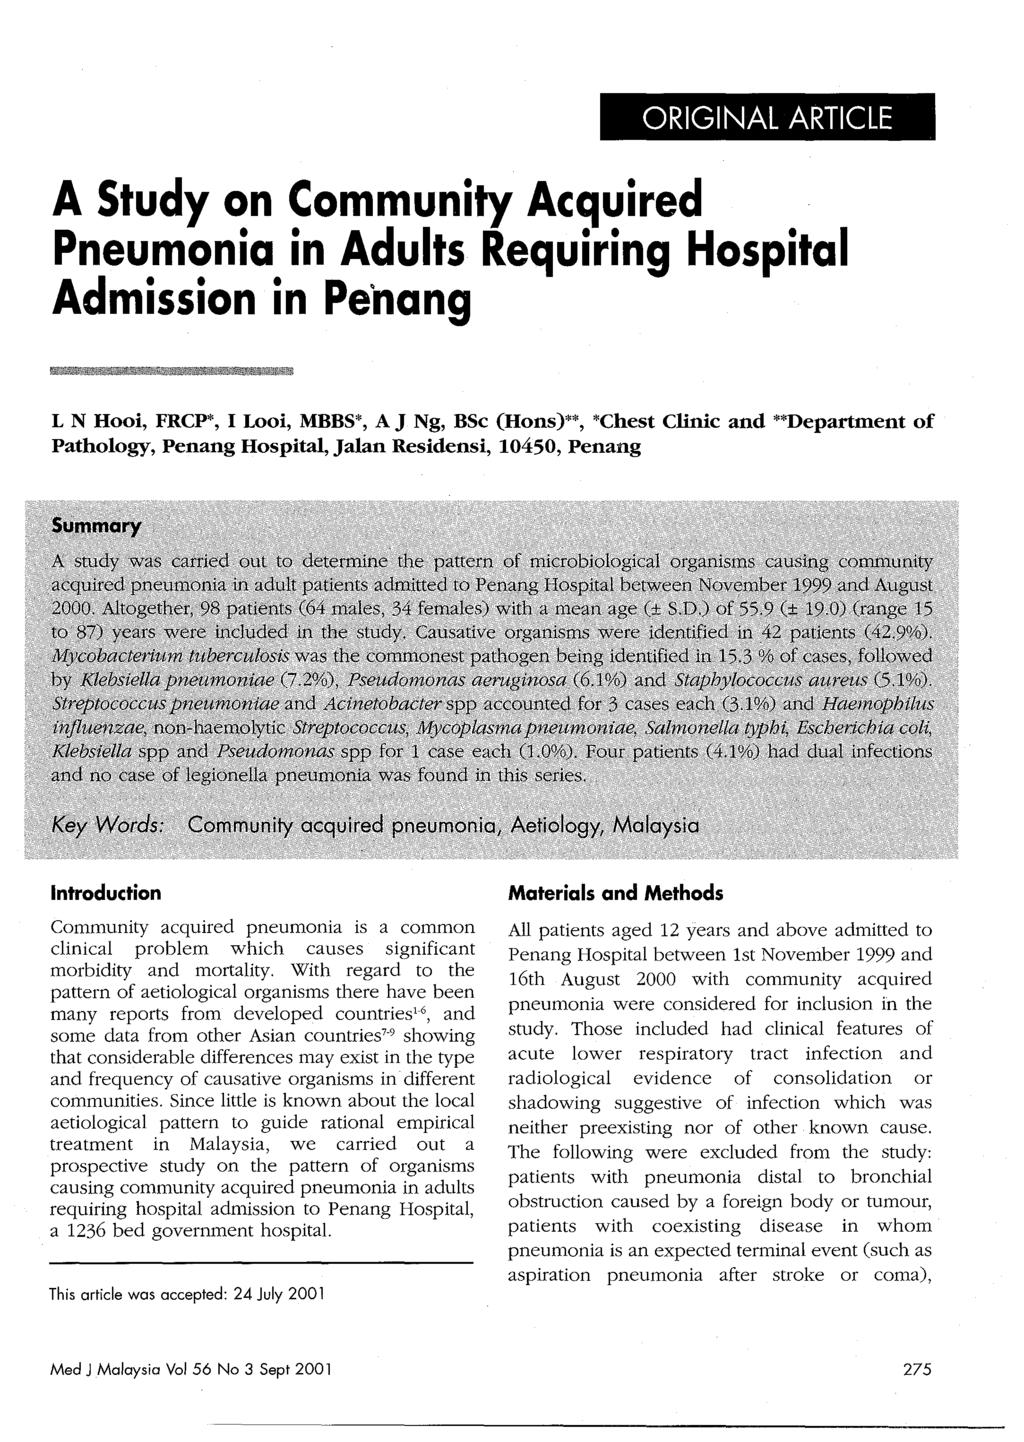 ORIGINAL ARTICLE A Study on Community Acquired Pneumonia in Adults Requiring Hospital Admission in Penang L N Hooi, FRCP*, I Looi, MBBS*, A J Ng, BSc (Hons)**, *Chest Clinic and **Department of